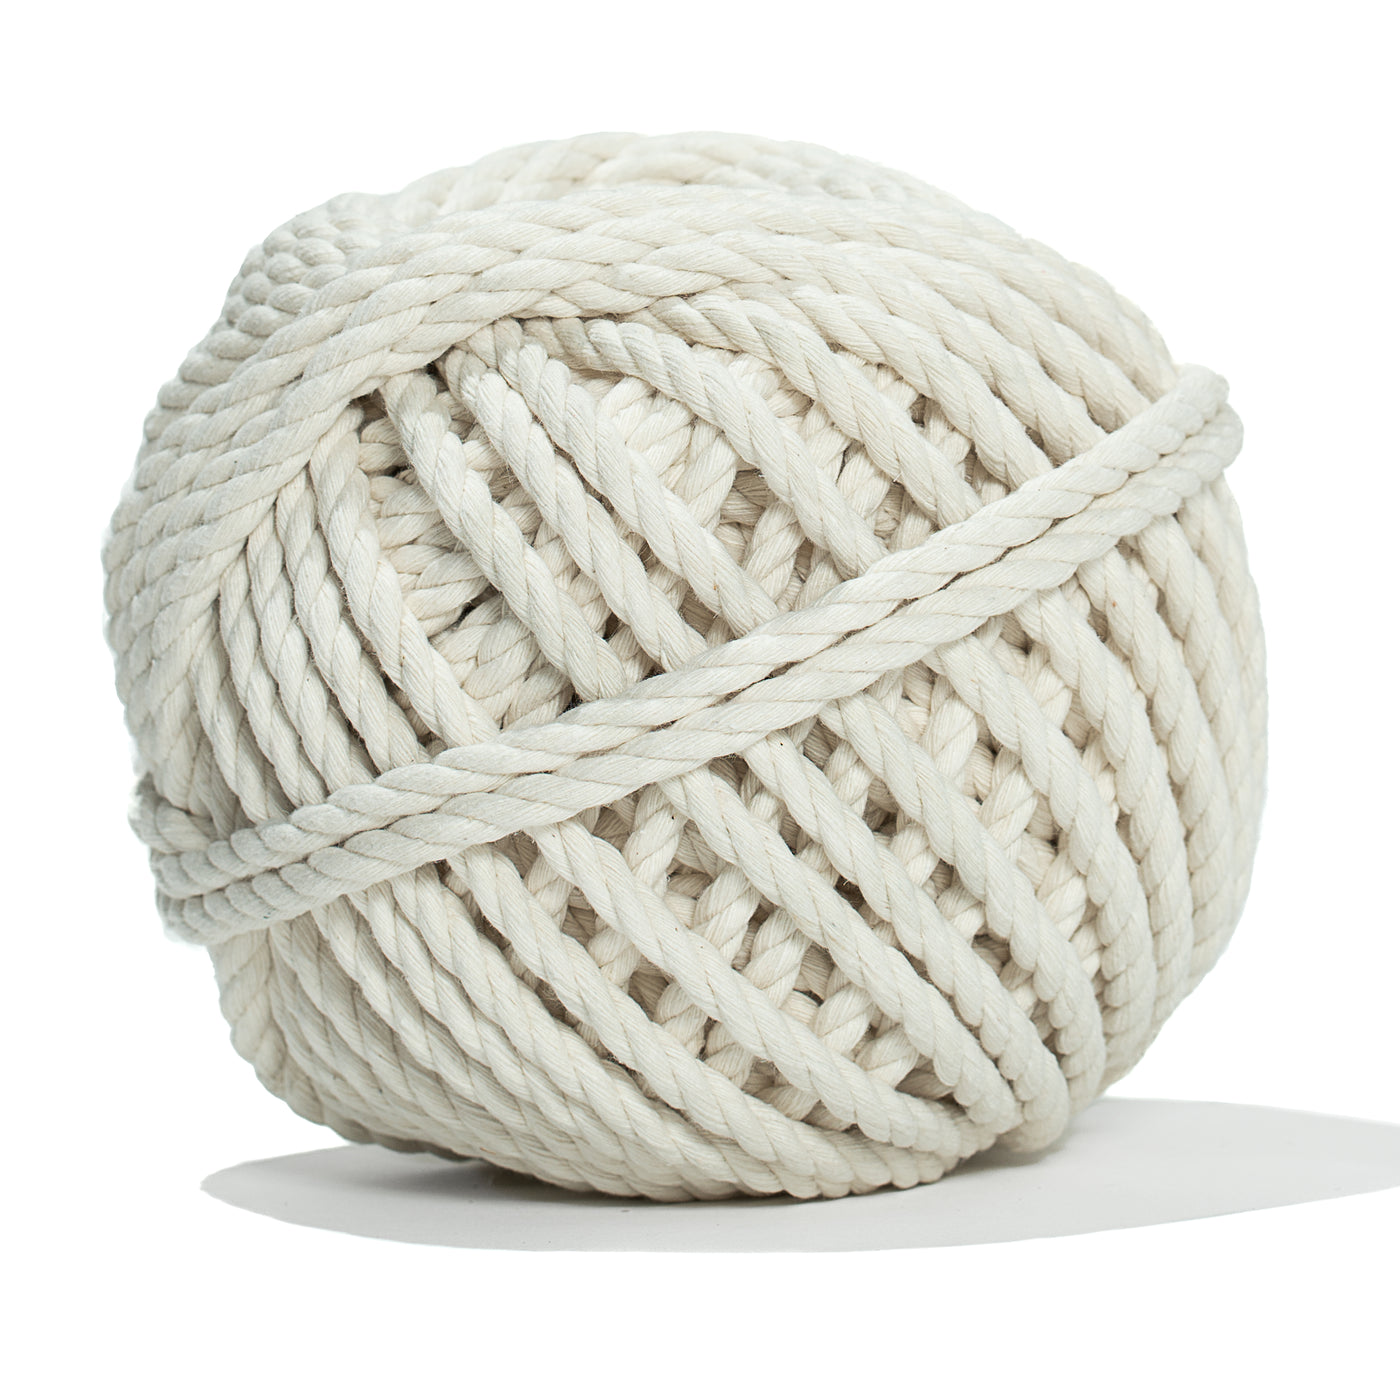 COTTON ROPE ZERO WASTE 7 MM - 3 PLY - NATURAL COLOR